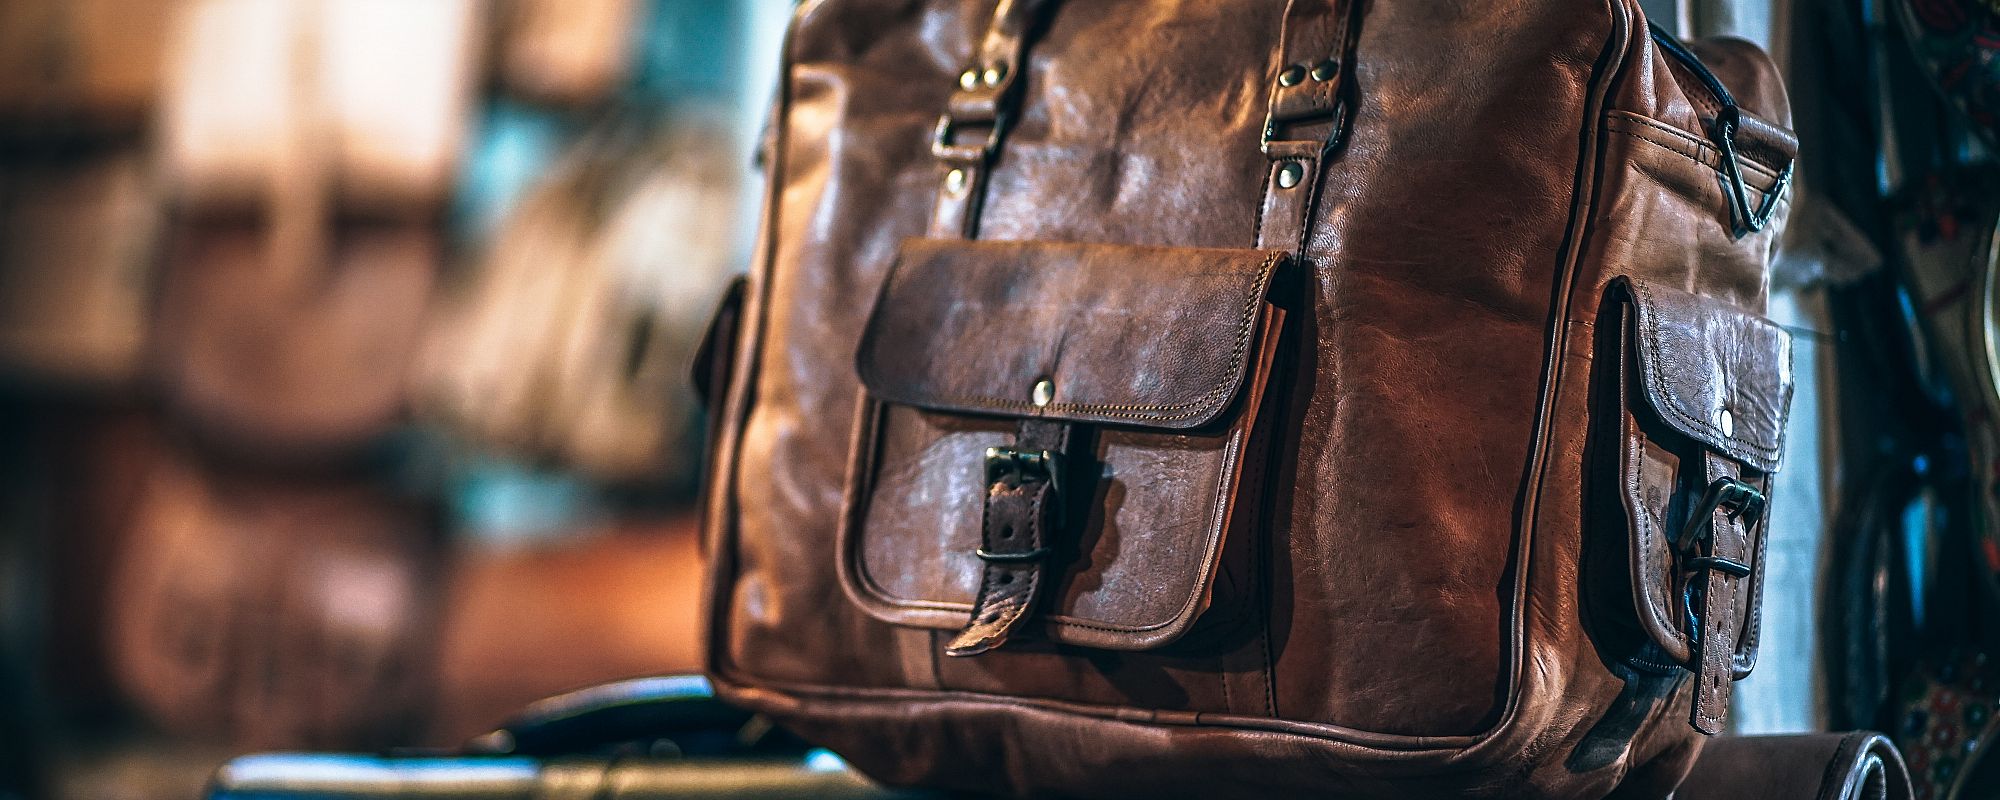 LEATHER CLEANING TECHNOLOGY ALLOWS COMPANIES TO RESTORE, NOT REPLACE